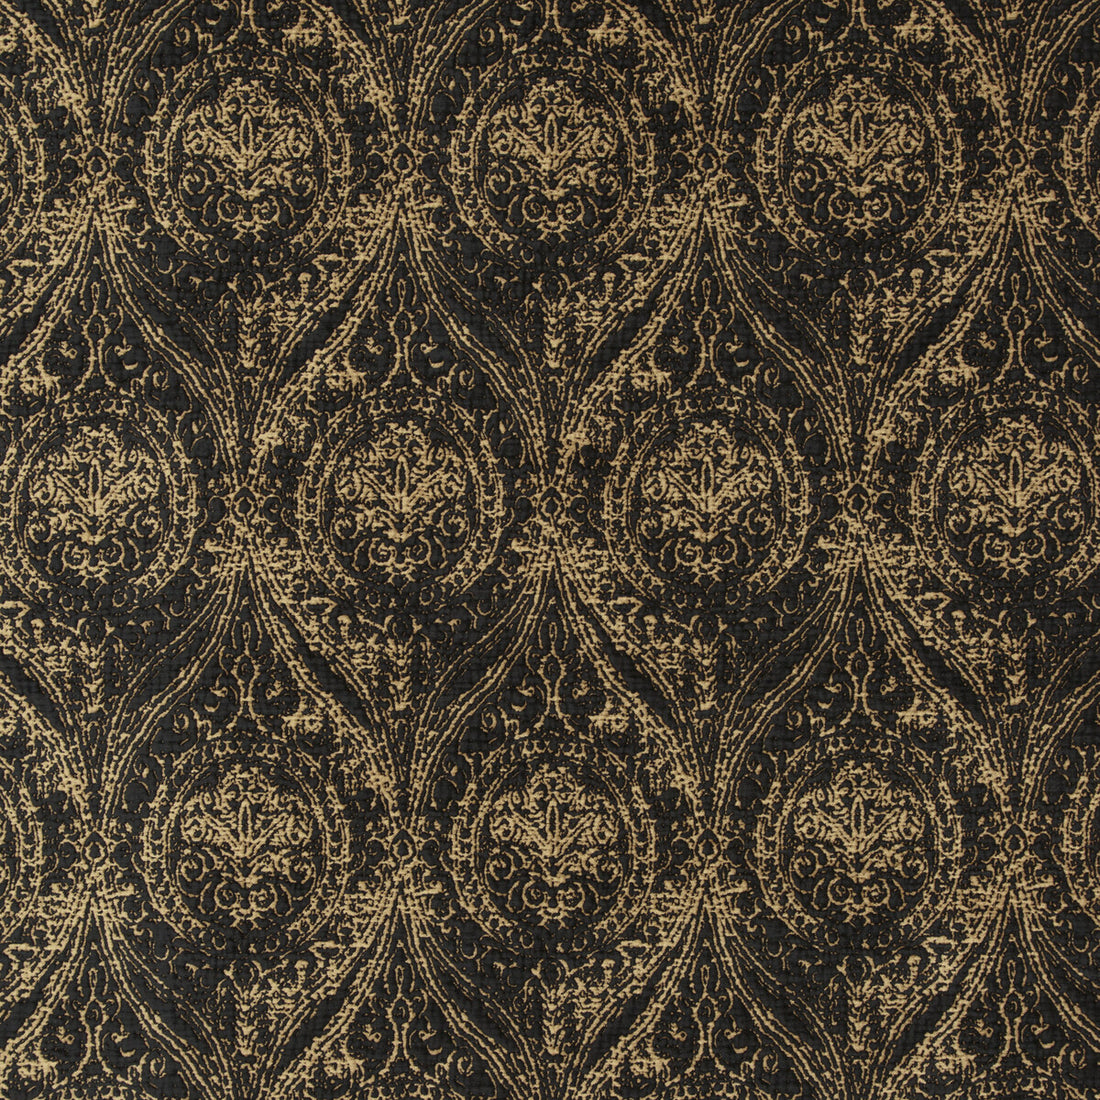 Wolsey fabric in bronze/ebony color - pattern BF10654.5.0 - by G P &amp; J Baker in the Historic Royal Palaces collection